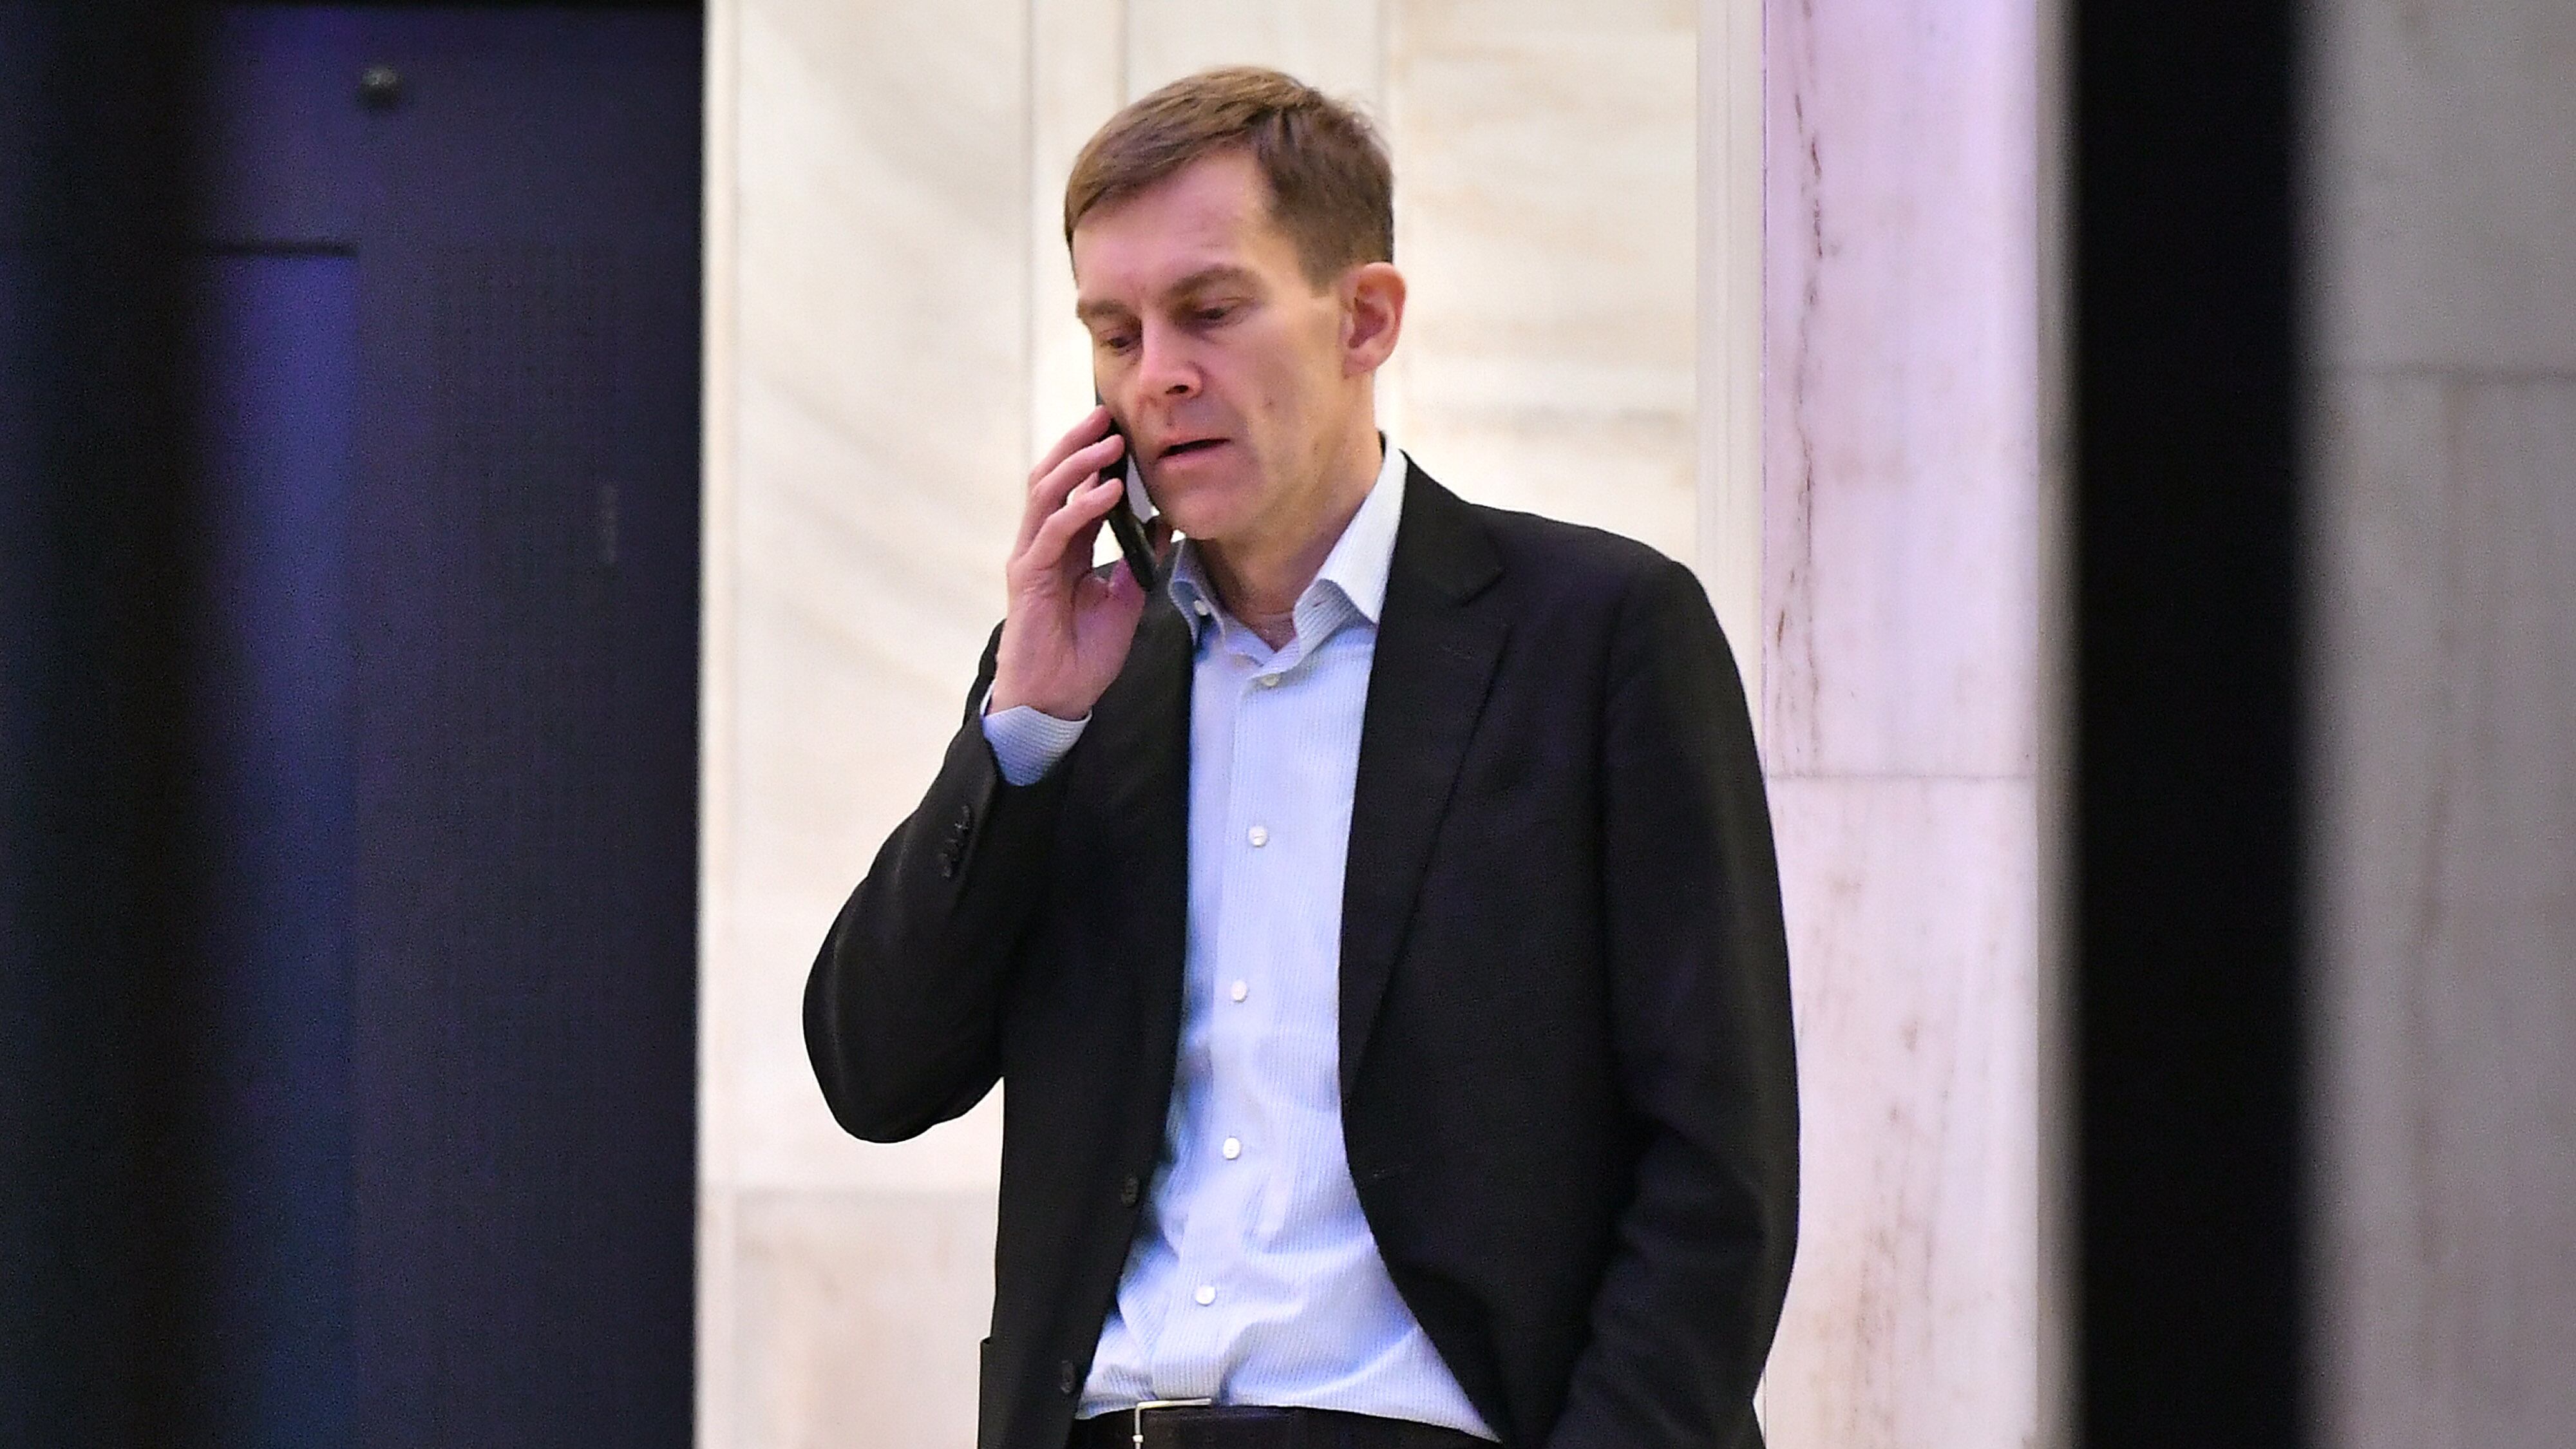 Five former Labour staff members, including ex-party director of strategy and communications Seumas Milne, had made clear they would ‘vigorously defend themselves’ against the claims